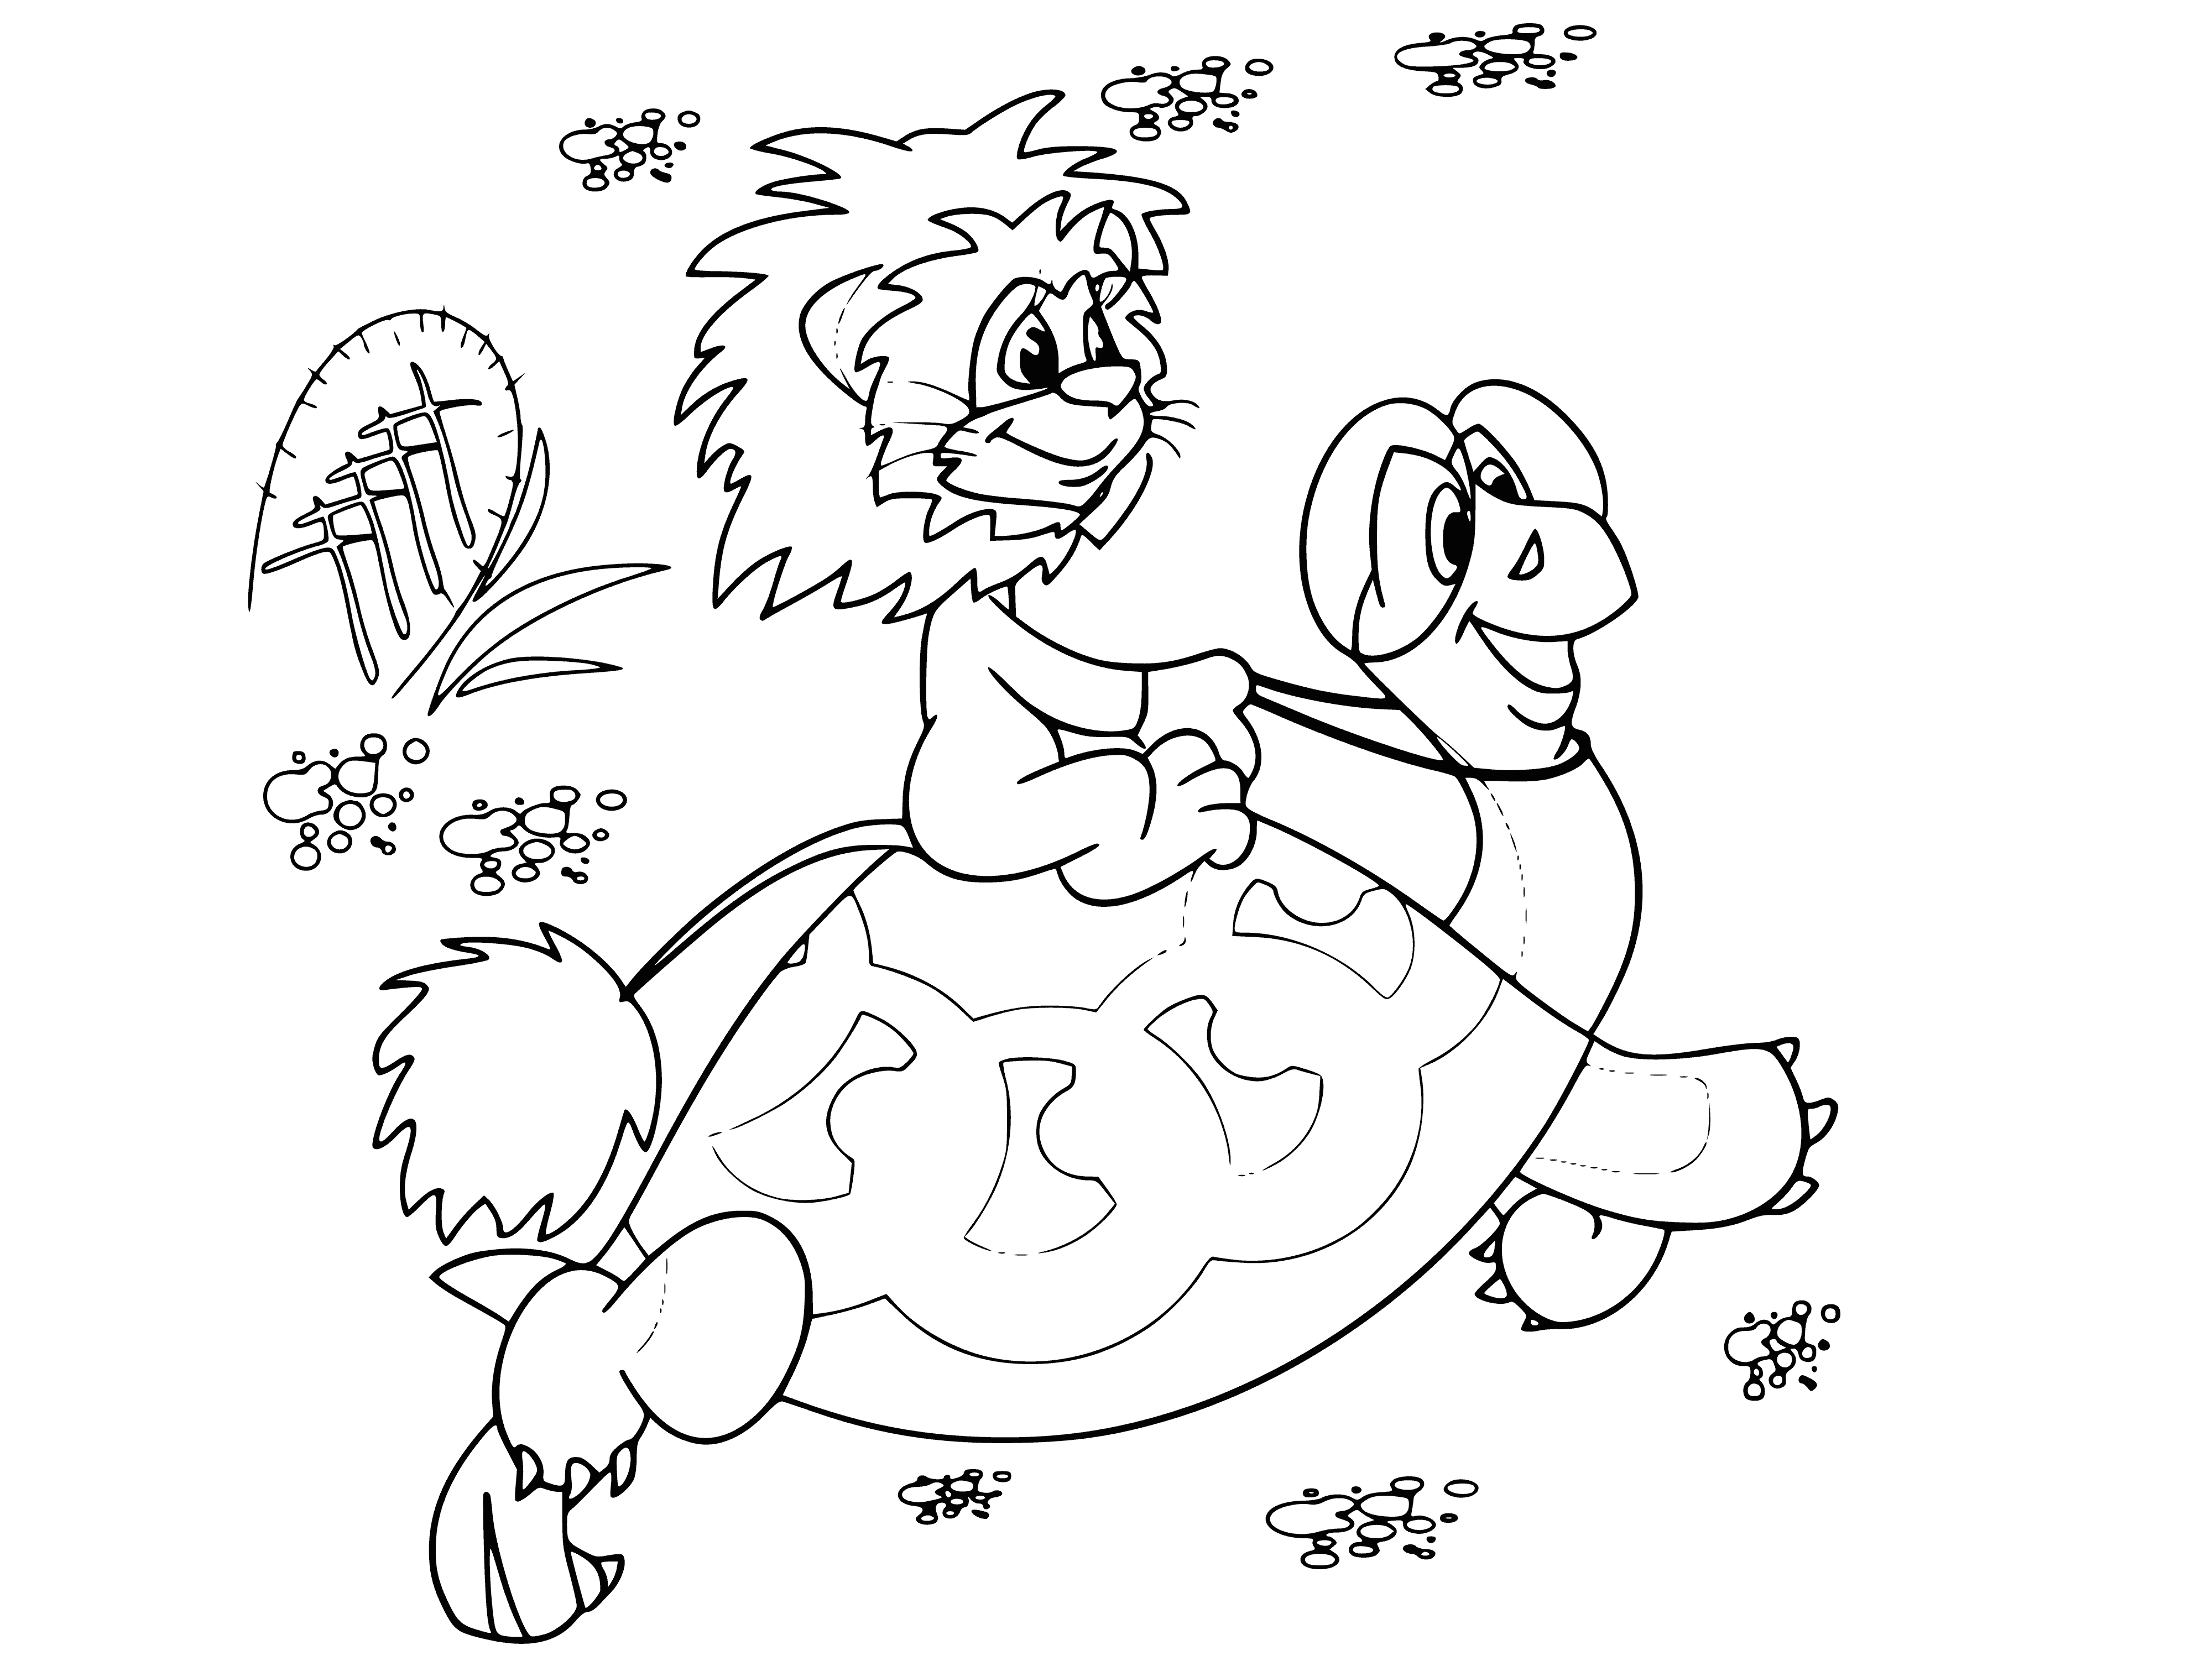 coloring page: Two friends, a lion cub & a turtle, sing a song while spending time together. Holding shells & sticks, they look at each other with love & joy.